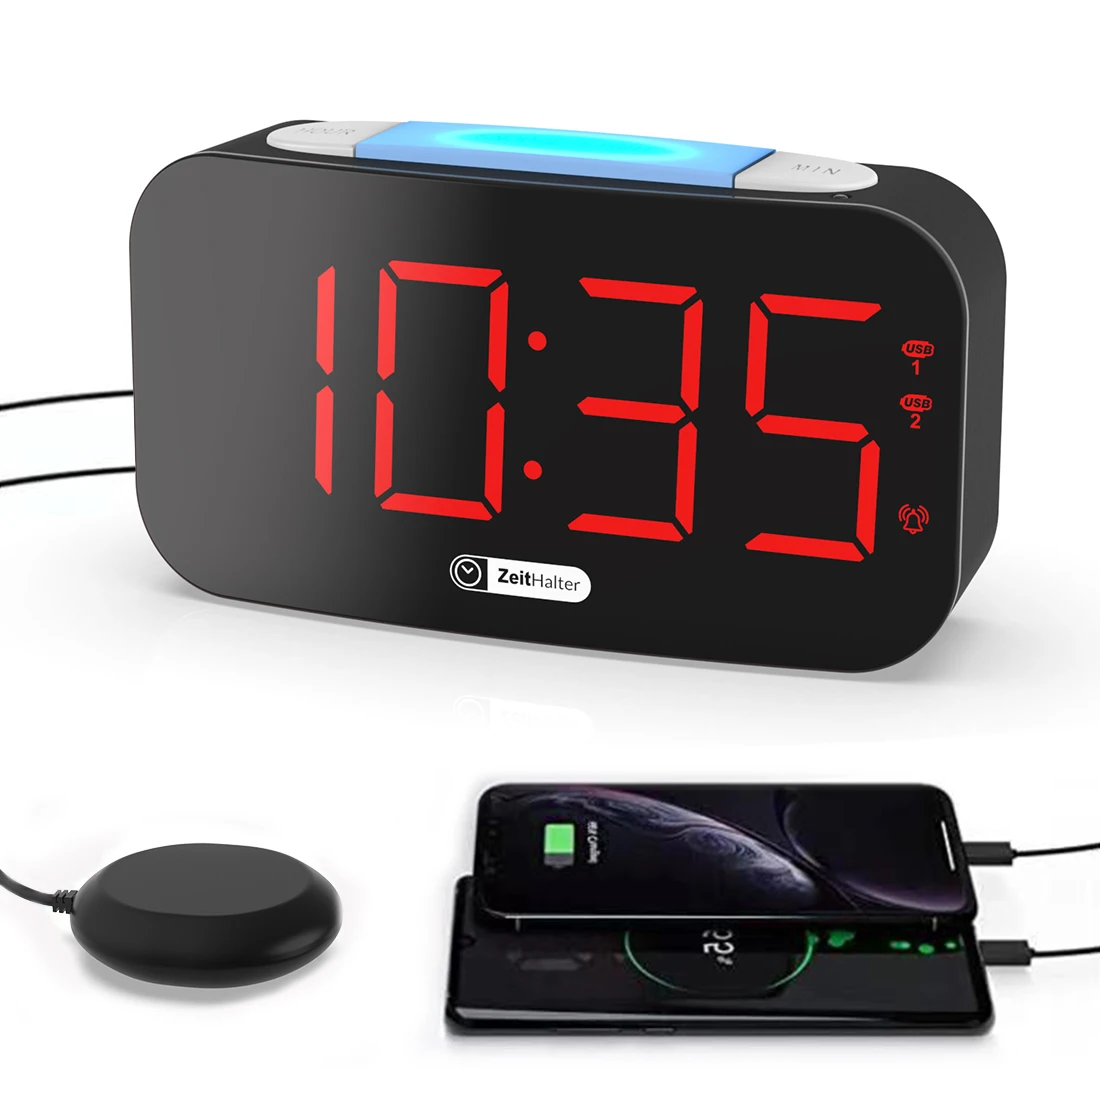 

2021 Loud Alarm Clock for Heavy Sleepers Vibrating Alarm Clock with Bed Shaker for Deaf and Hard of Hearing Night Light Snooze